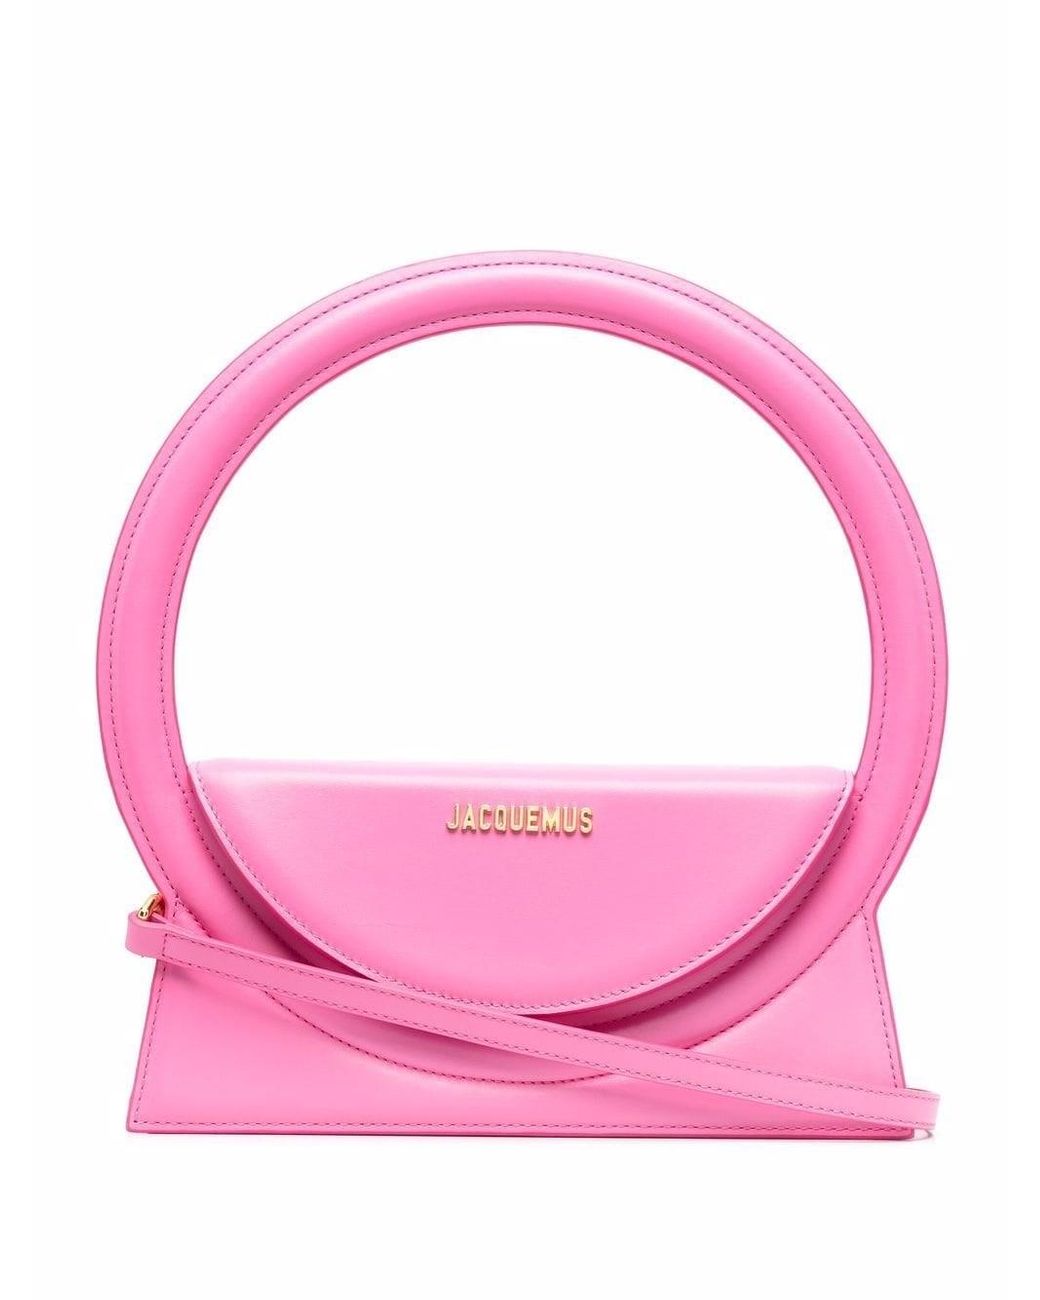 Jacquemus Le Sac Round Bag in Pink | Lyst